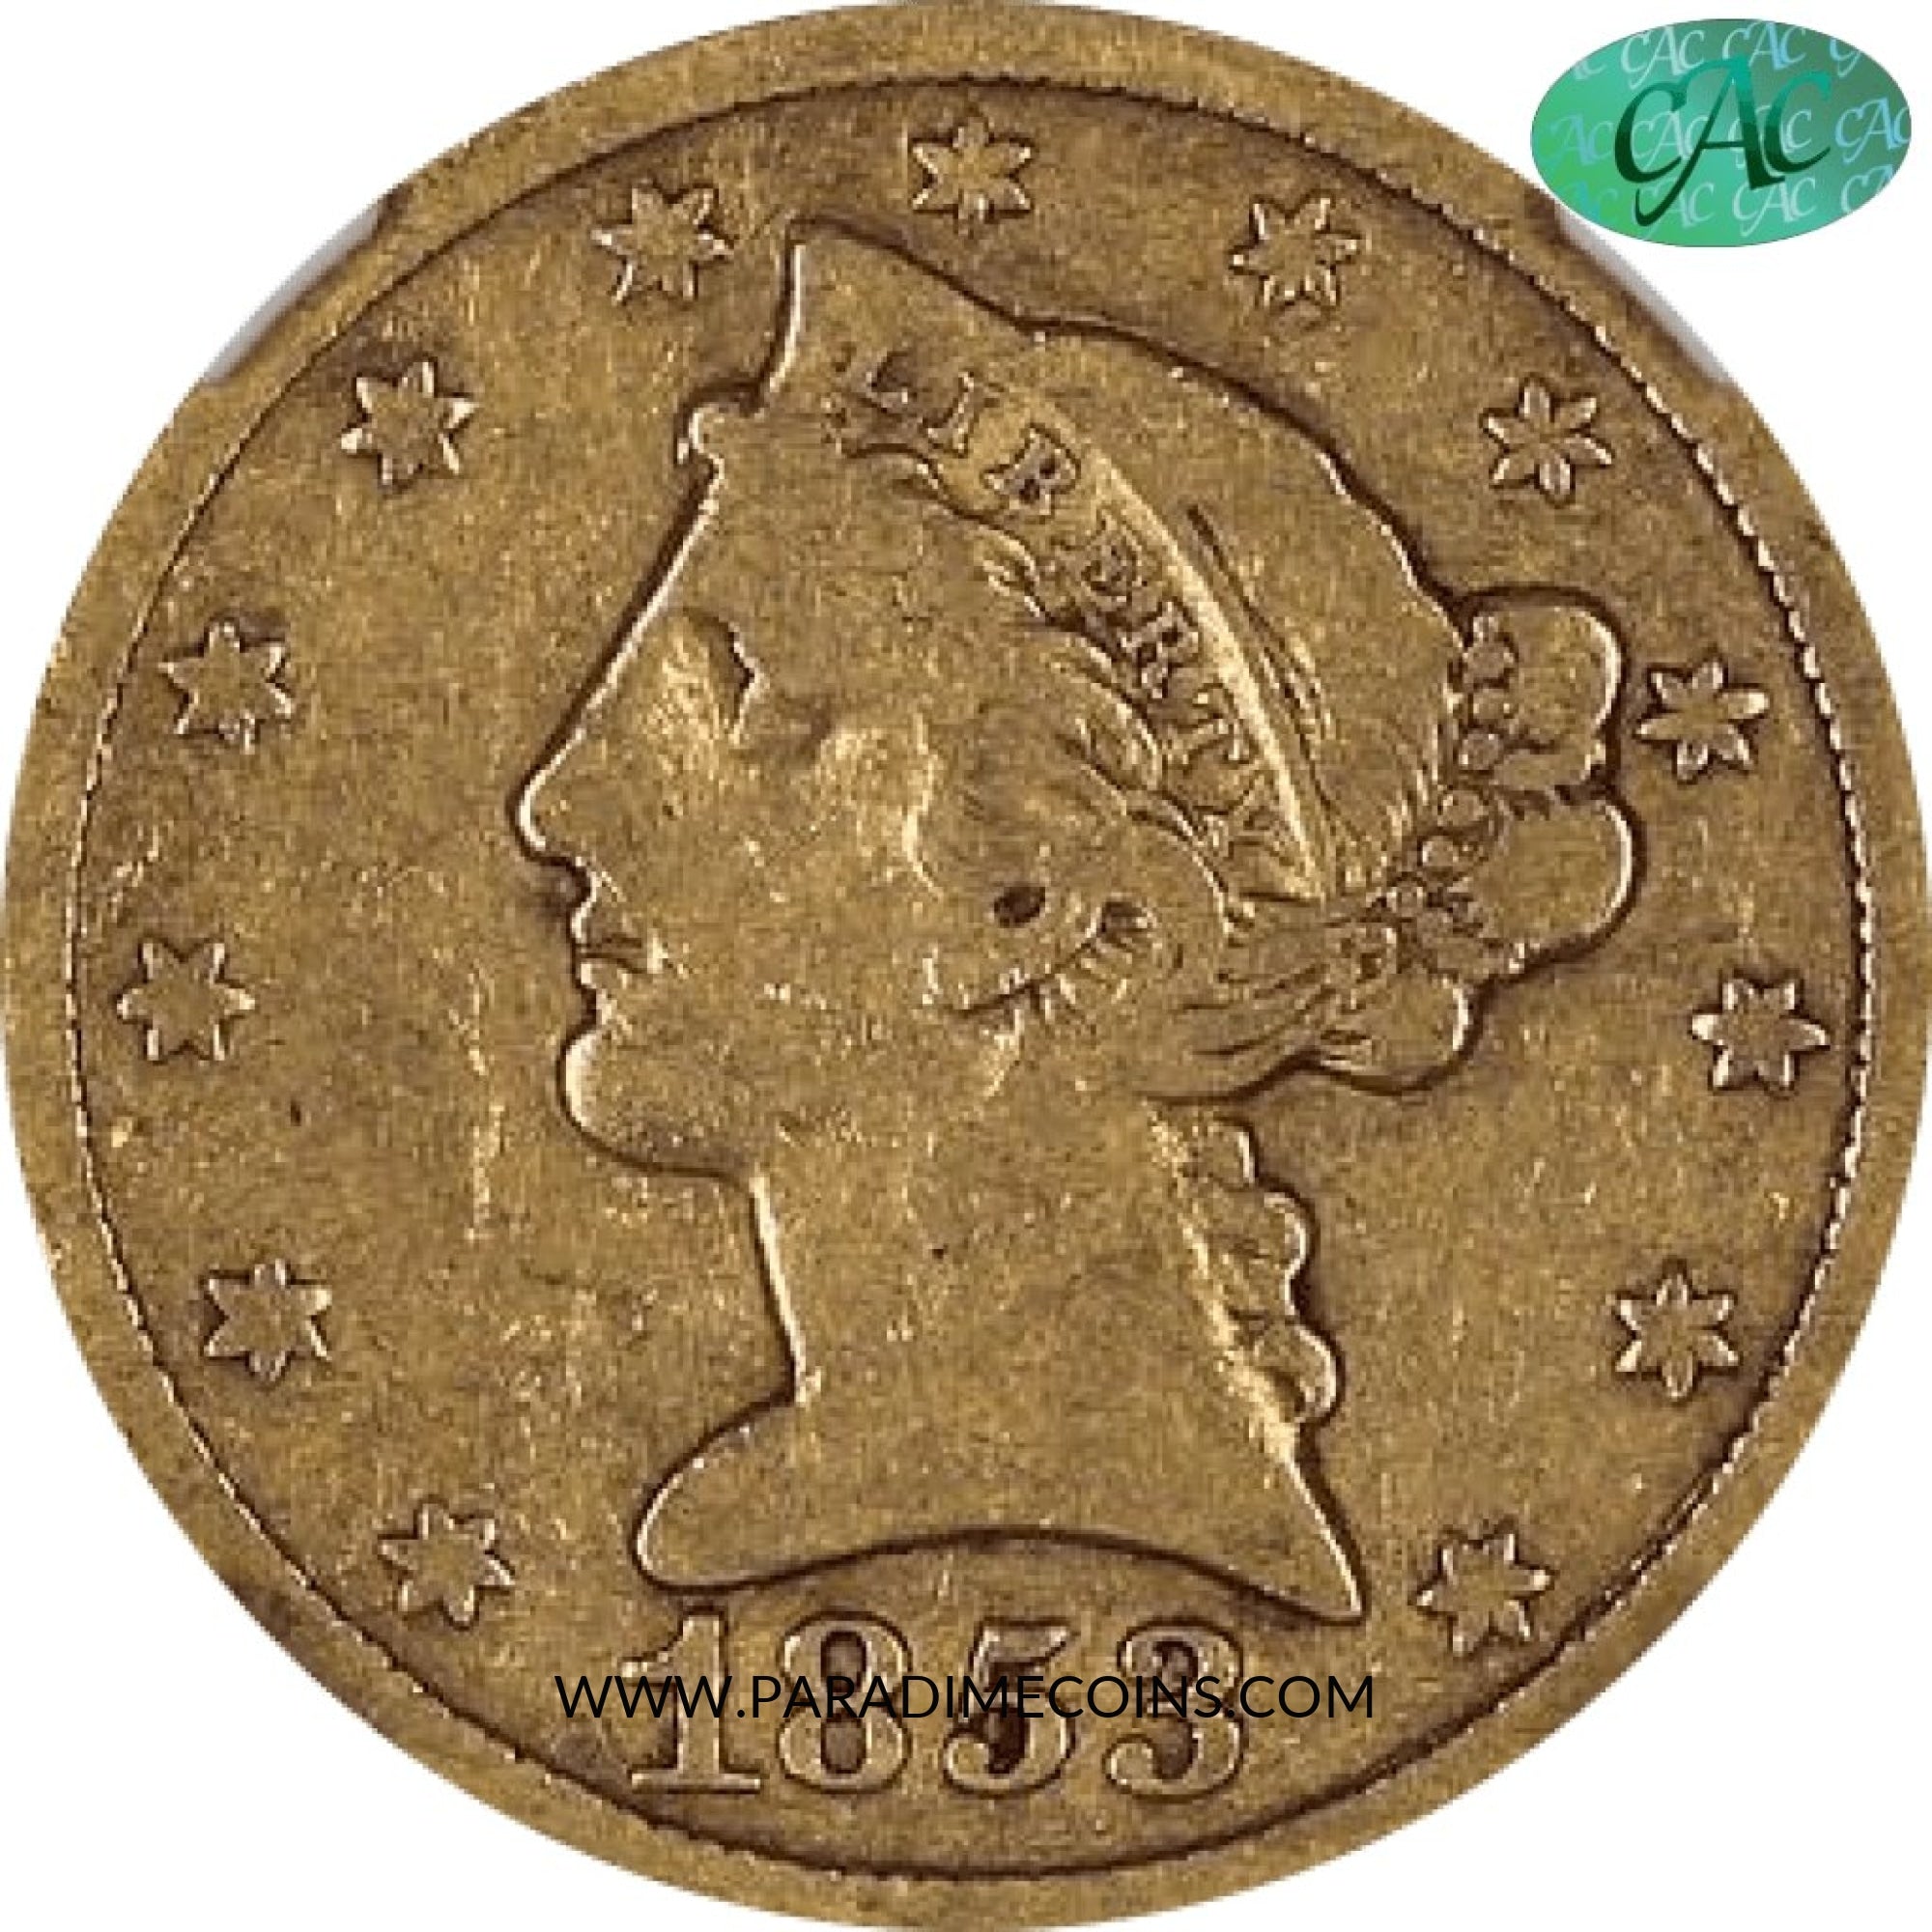 1853 $5 F12 NGC CAC - Paradime Coins | PCGS NGC CACG CAC Rare US Numismatic Coins For Sale